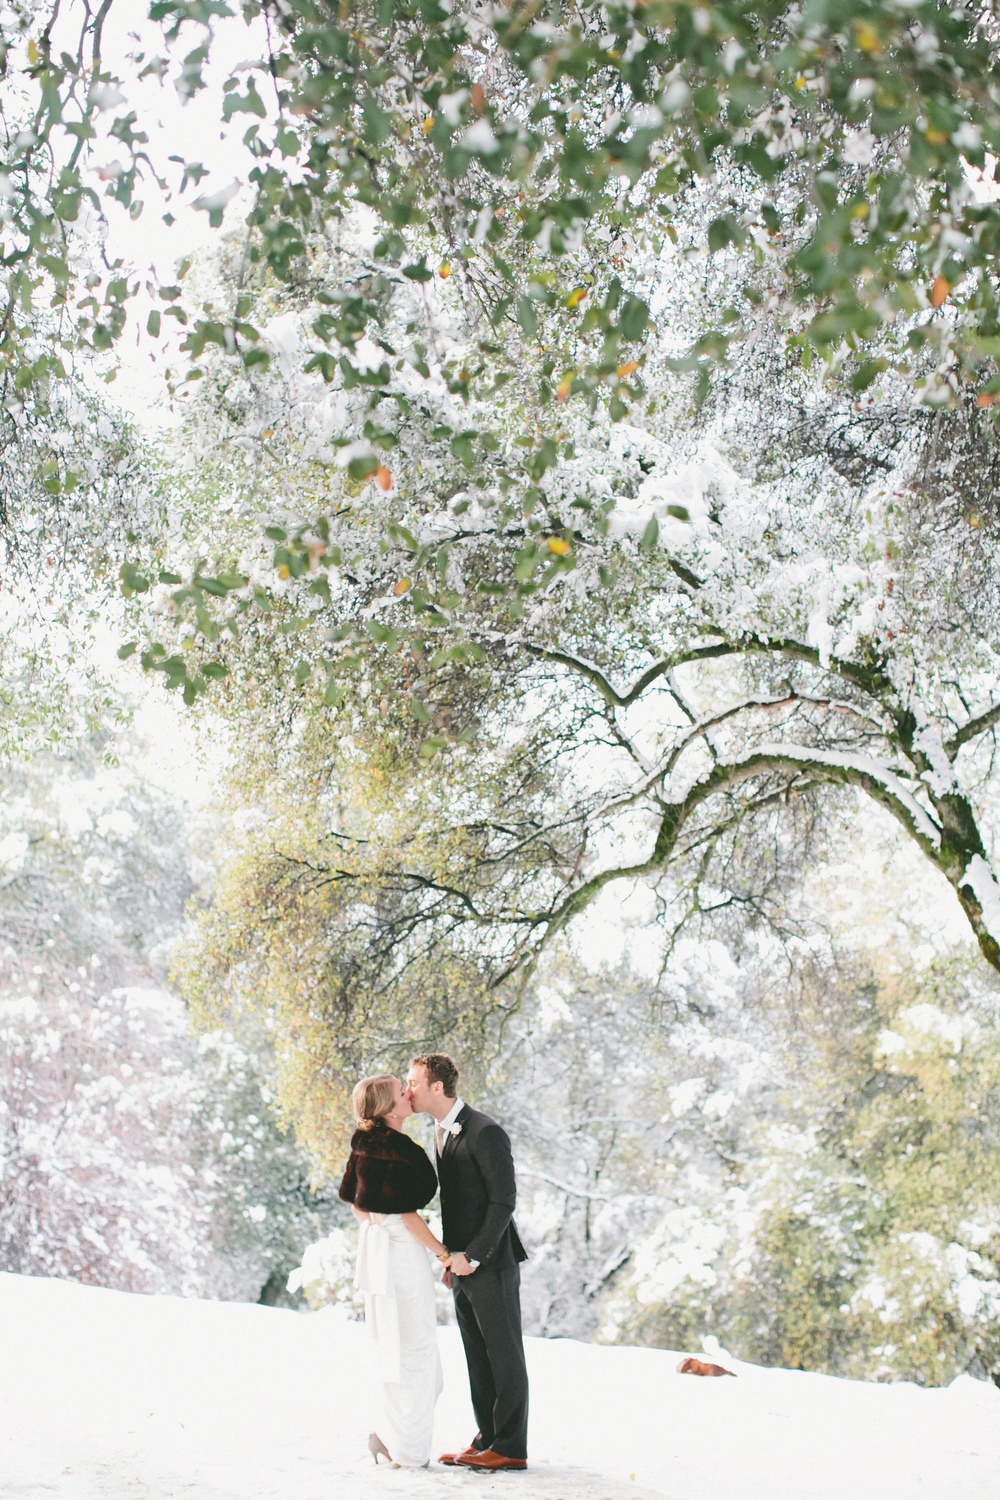 Winter Wedding First Look - A Vintage Fur Cape for a Romantic Snowy Winter Wedding